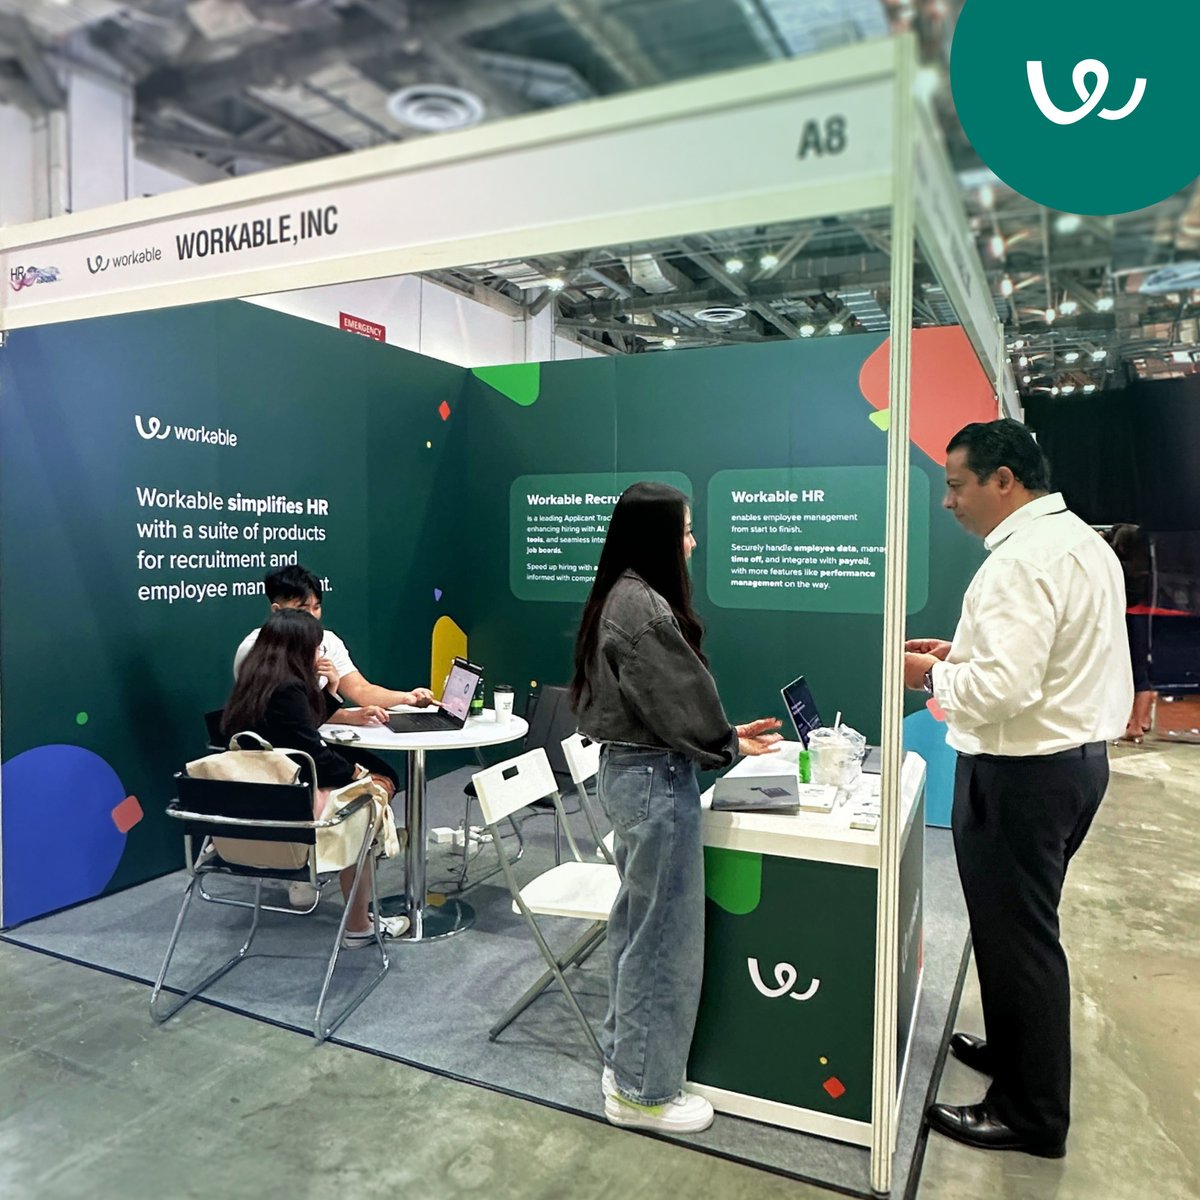 Our team had the pleasure of sponsoring the HR Tech Festival, this past week in Singapore! We loved meeting and connecting with others in the HR space, and sharing how Workable can help streamline recruitment and HR processes. Thanks to all who stopped by our booth.